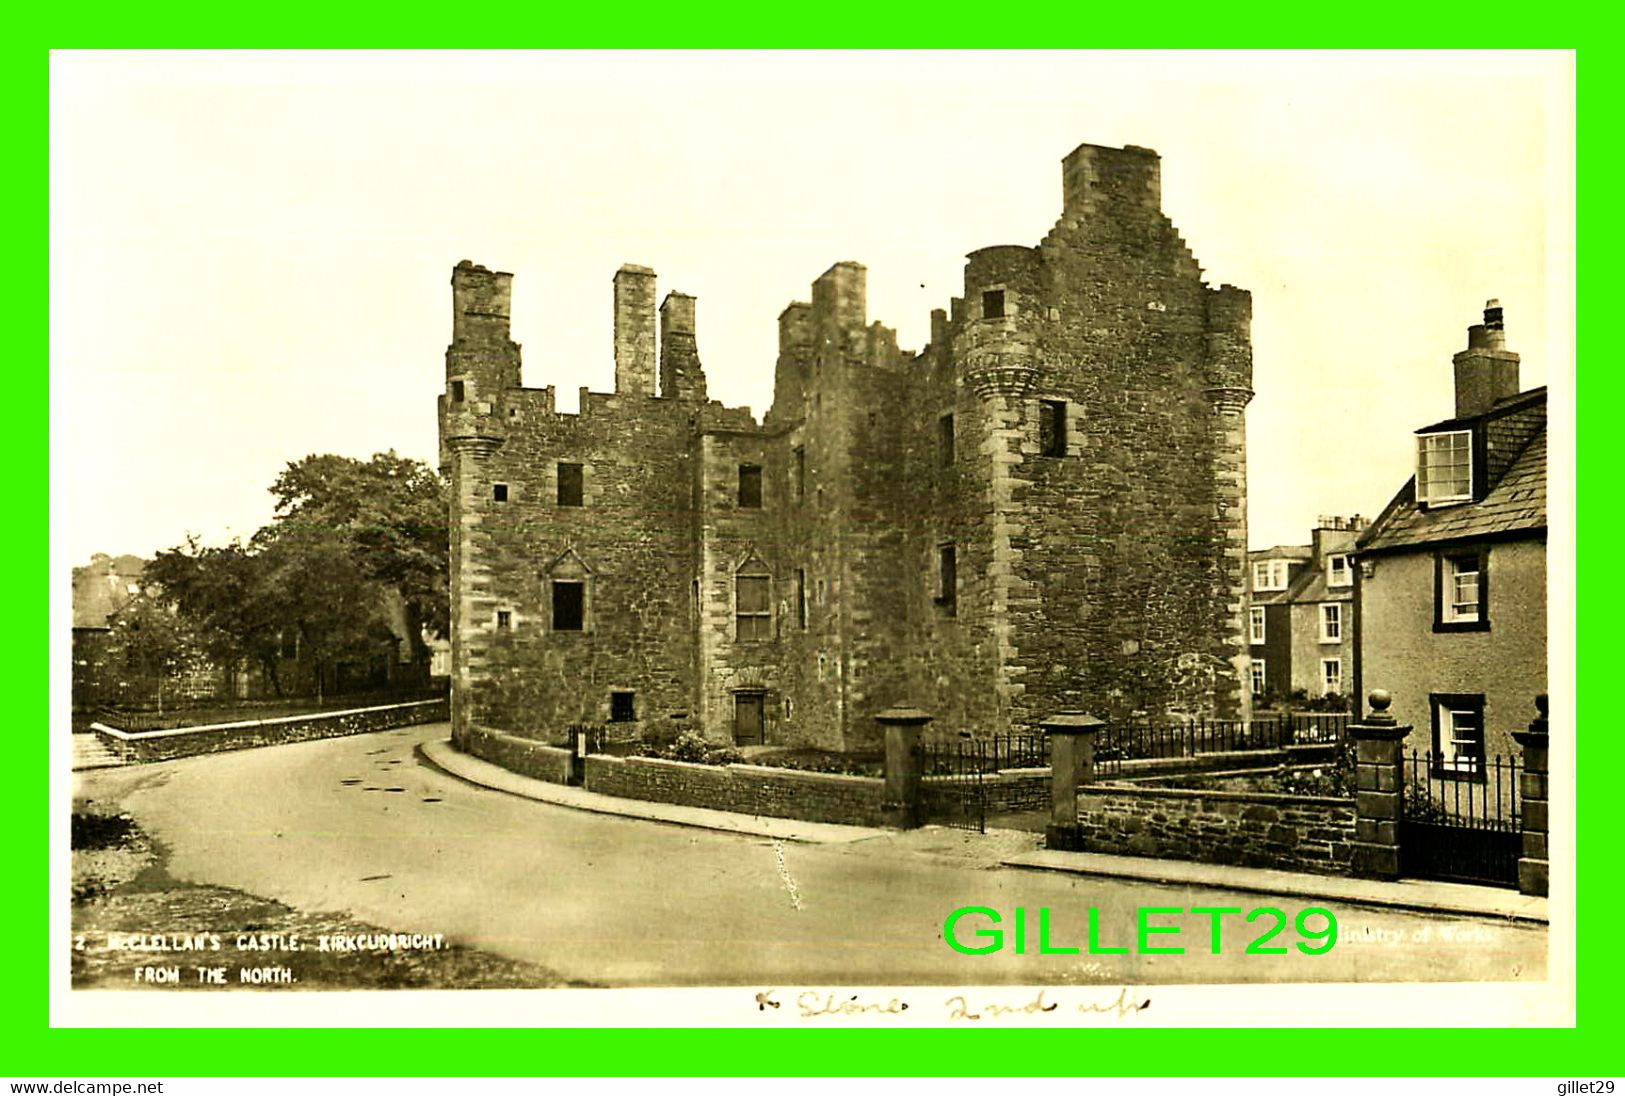 KIRKCUDBRICHT, SCOTLAND - McCLELLAN'S CASTLE FROM THE NORTH - MINISTRY OF WORKS - REAL PHOTOGRAPH - WRITTEN - - Kirkcudbrightshire